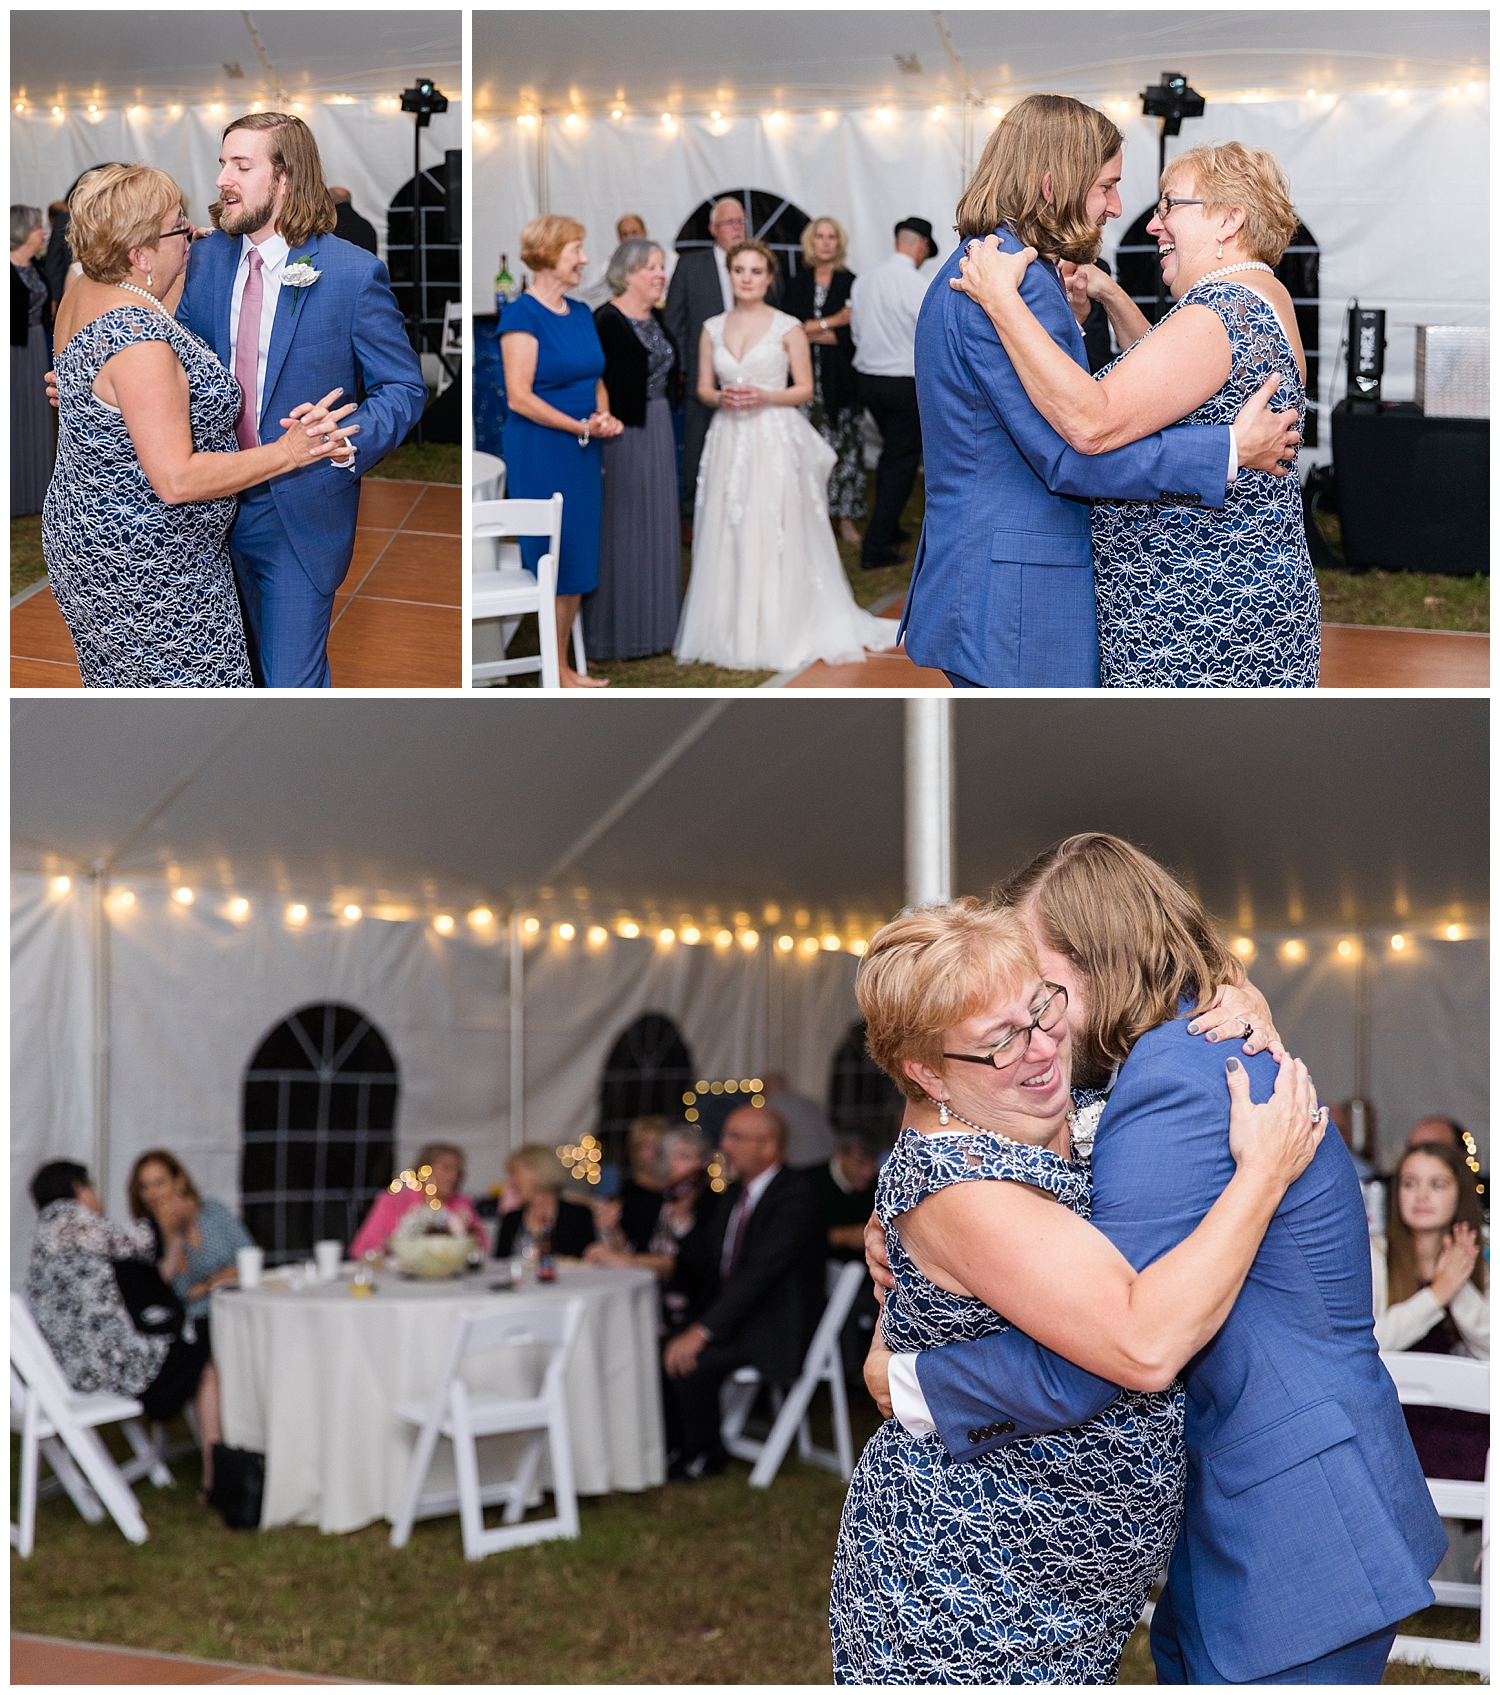 Mother-Son dance at Goffstown, New Hampshire wedding at a private estate. Photography by Halie Olszowy.